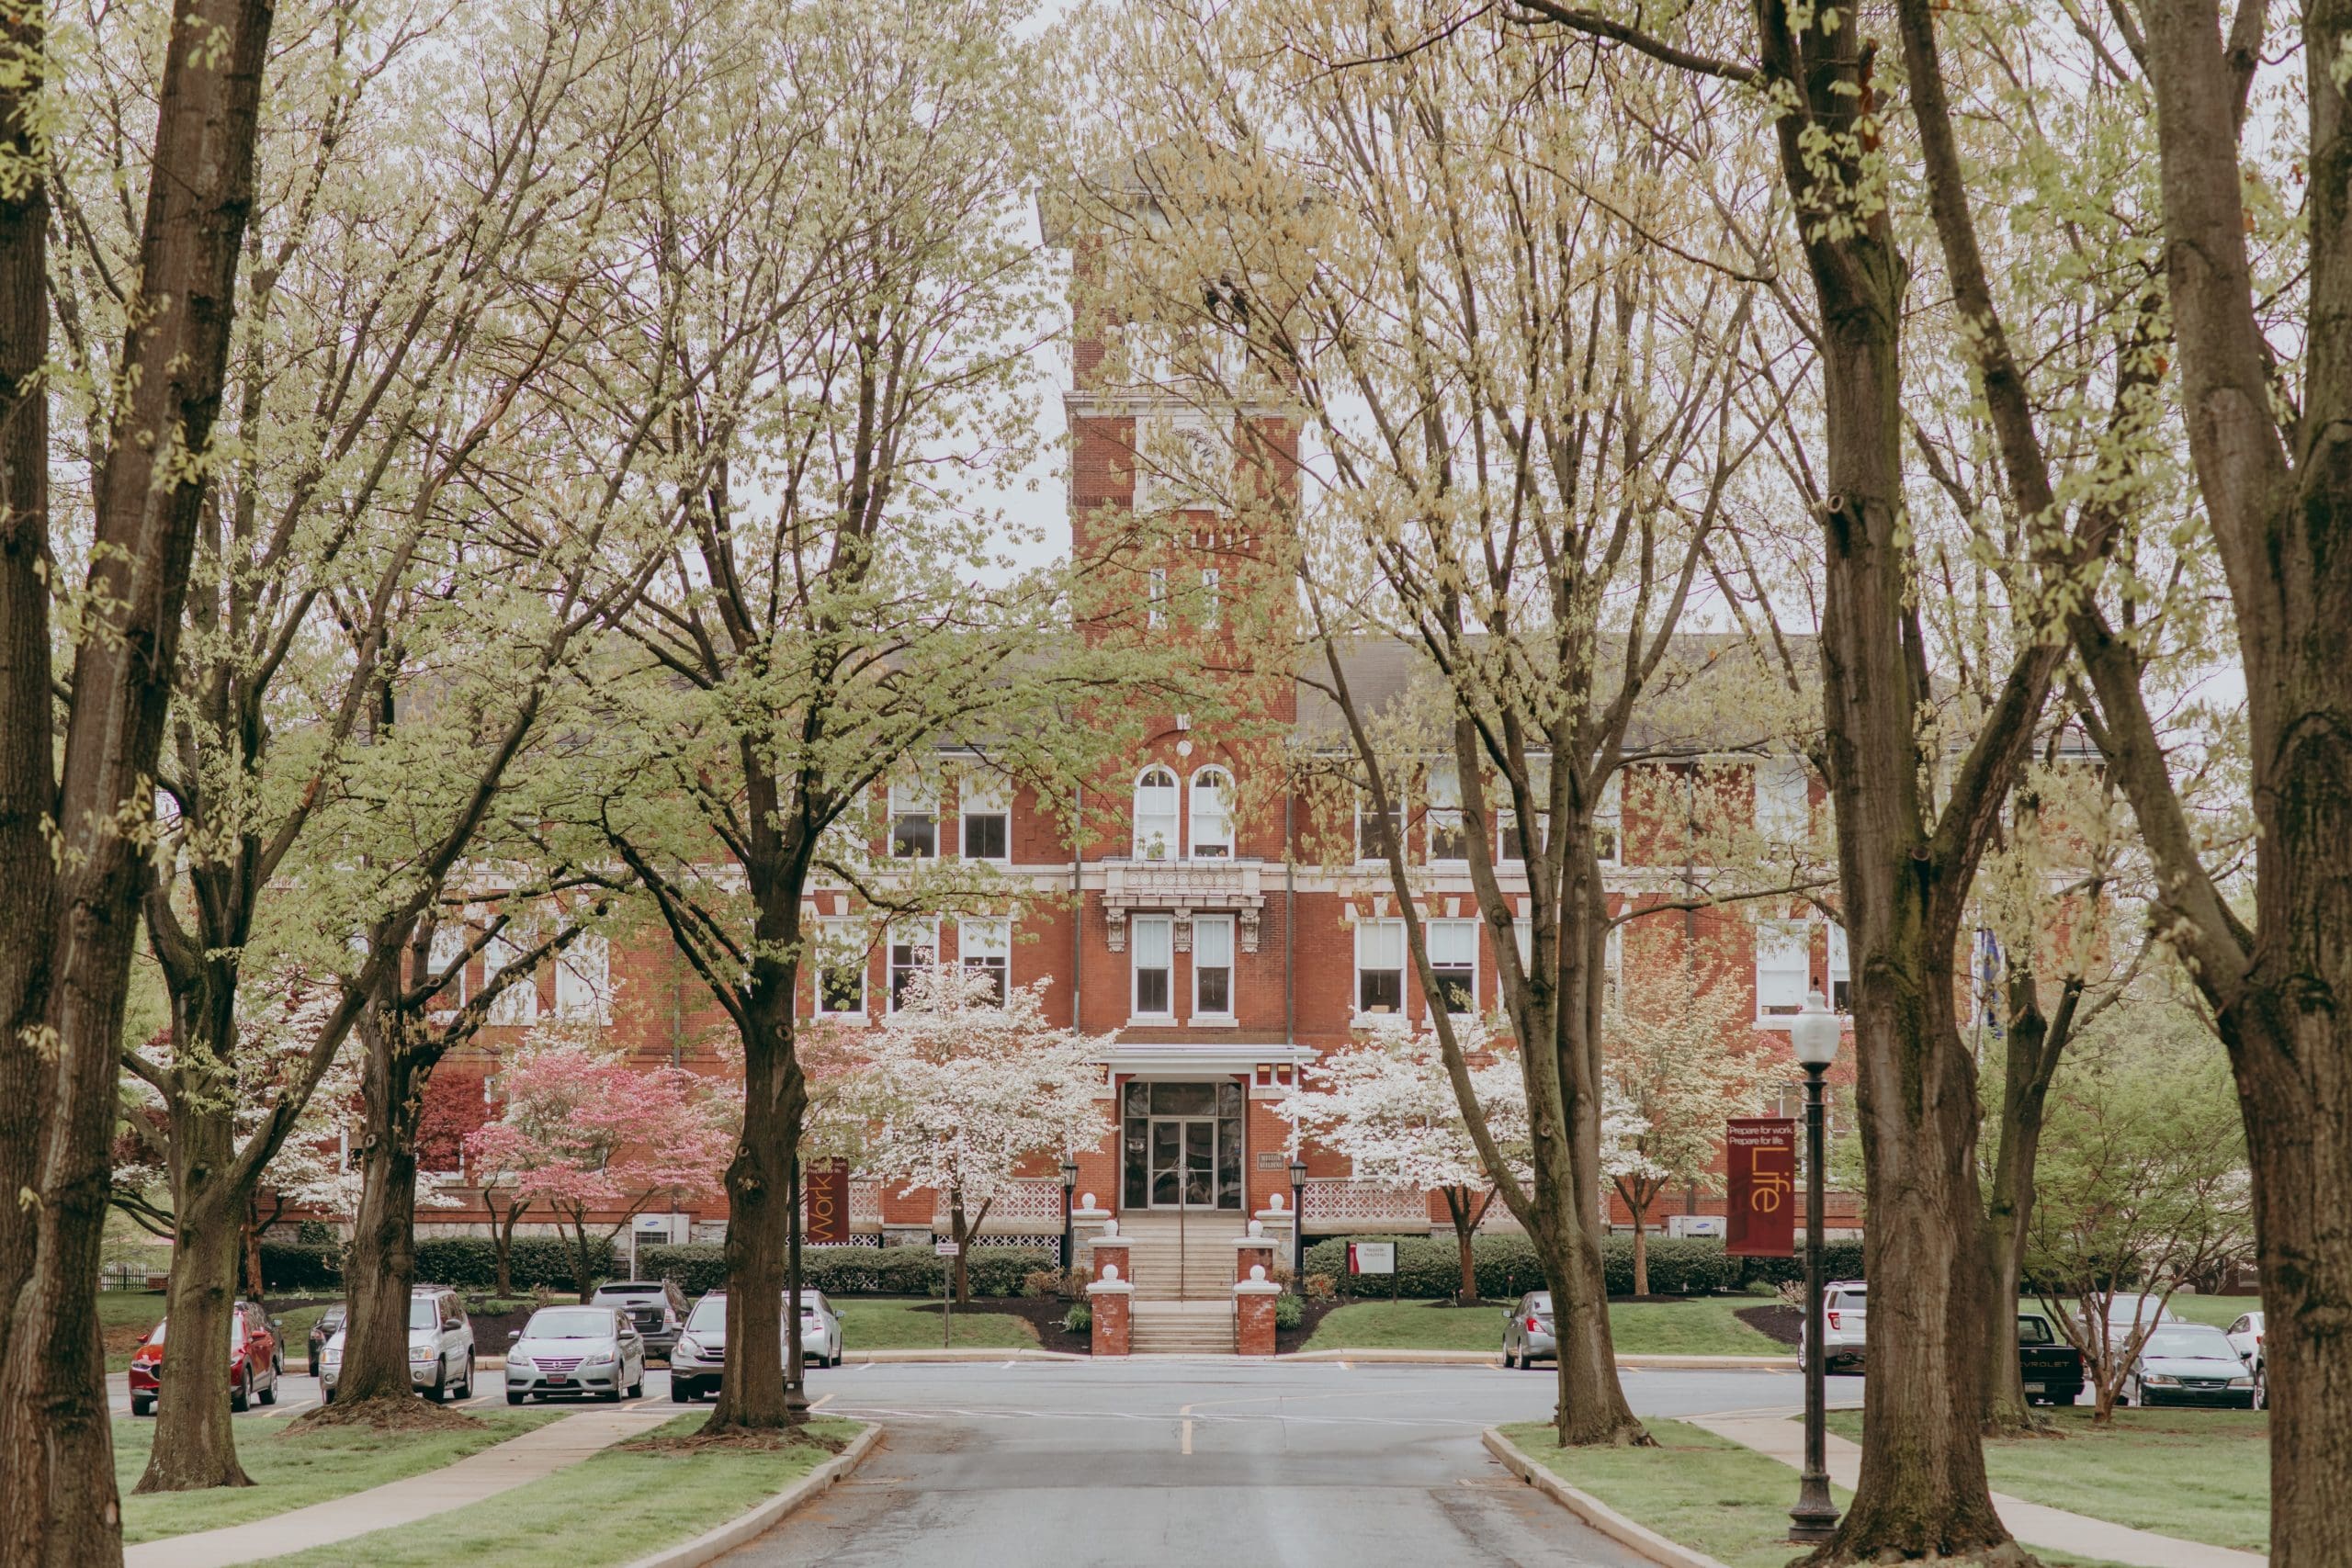 Mellor building on Main Campus in the Spring at Thaddeus Stevens College of Technology